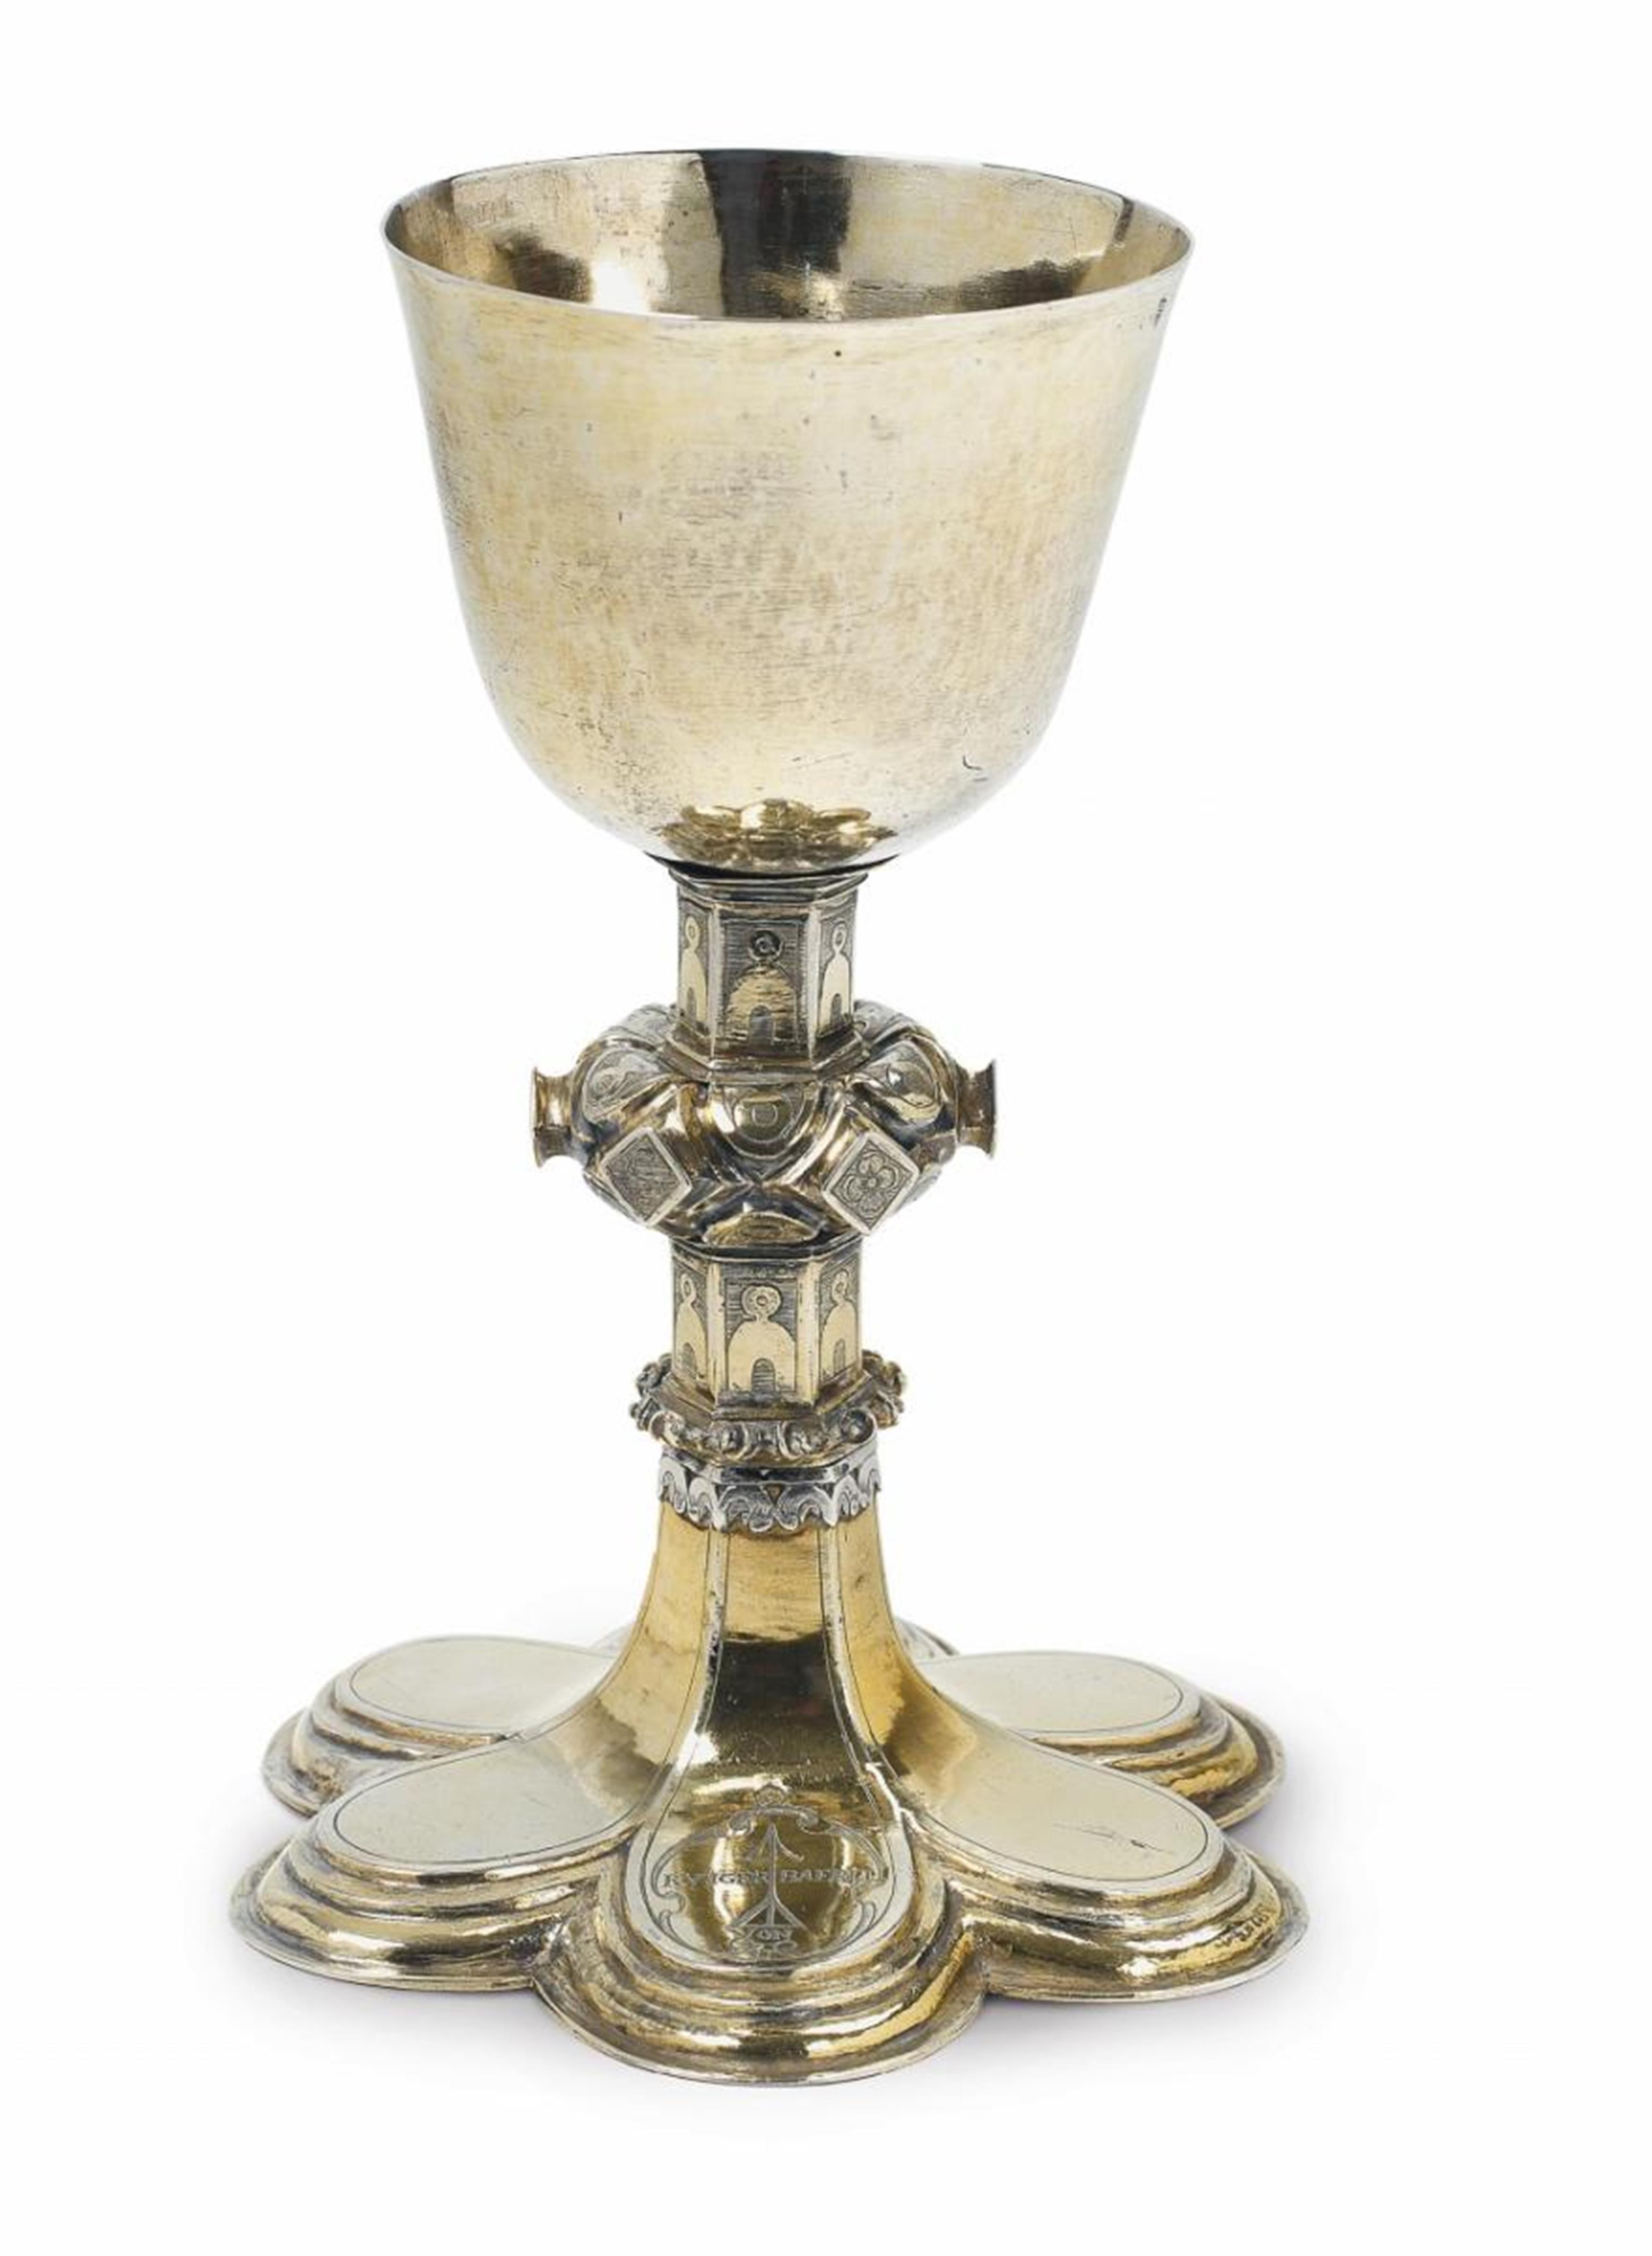 A Cologne silver partially gilt chalice, engraved "RVTGER VON BAERLL.". Maker's mark with a star, ca. 1625 - 30. - image-1